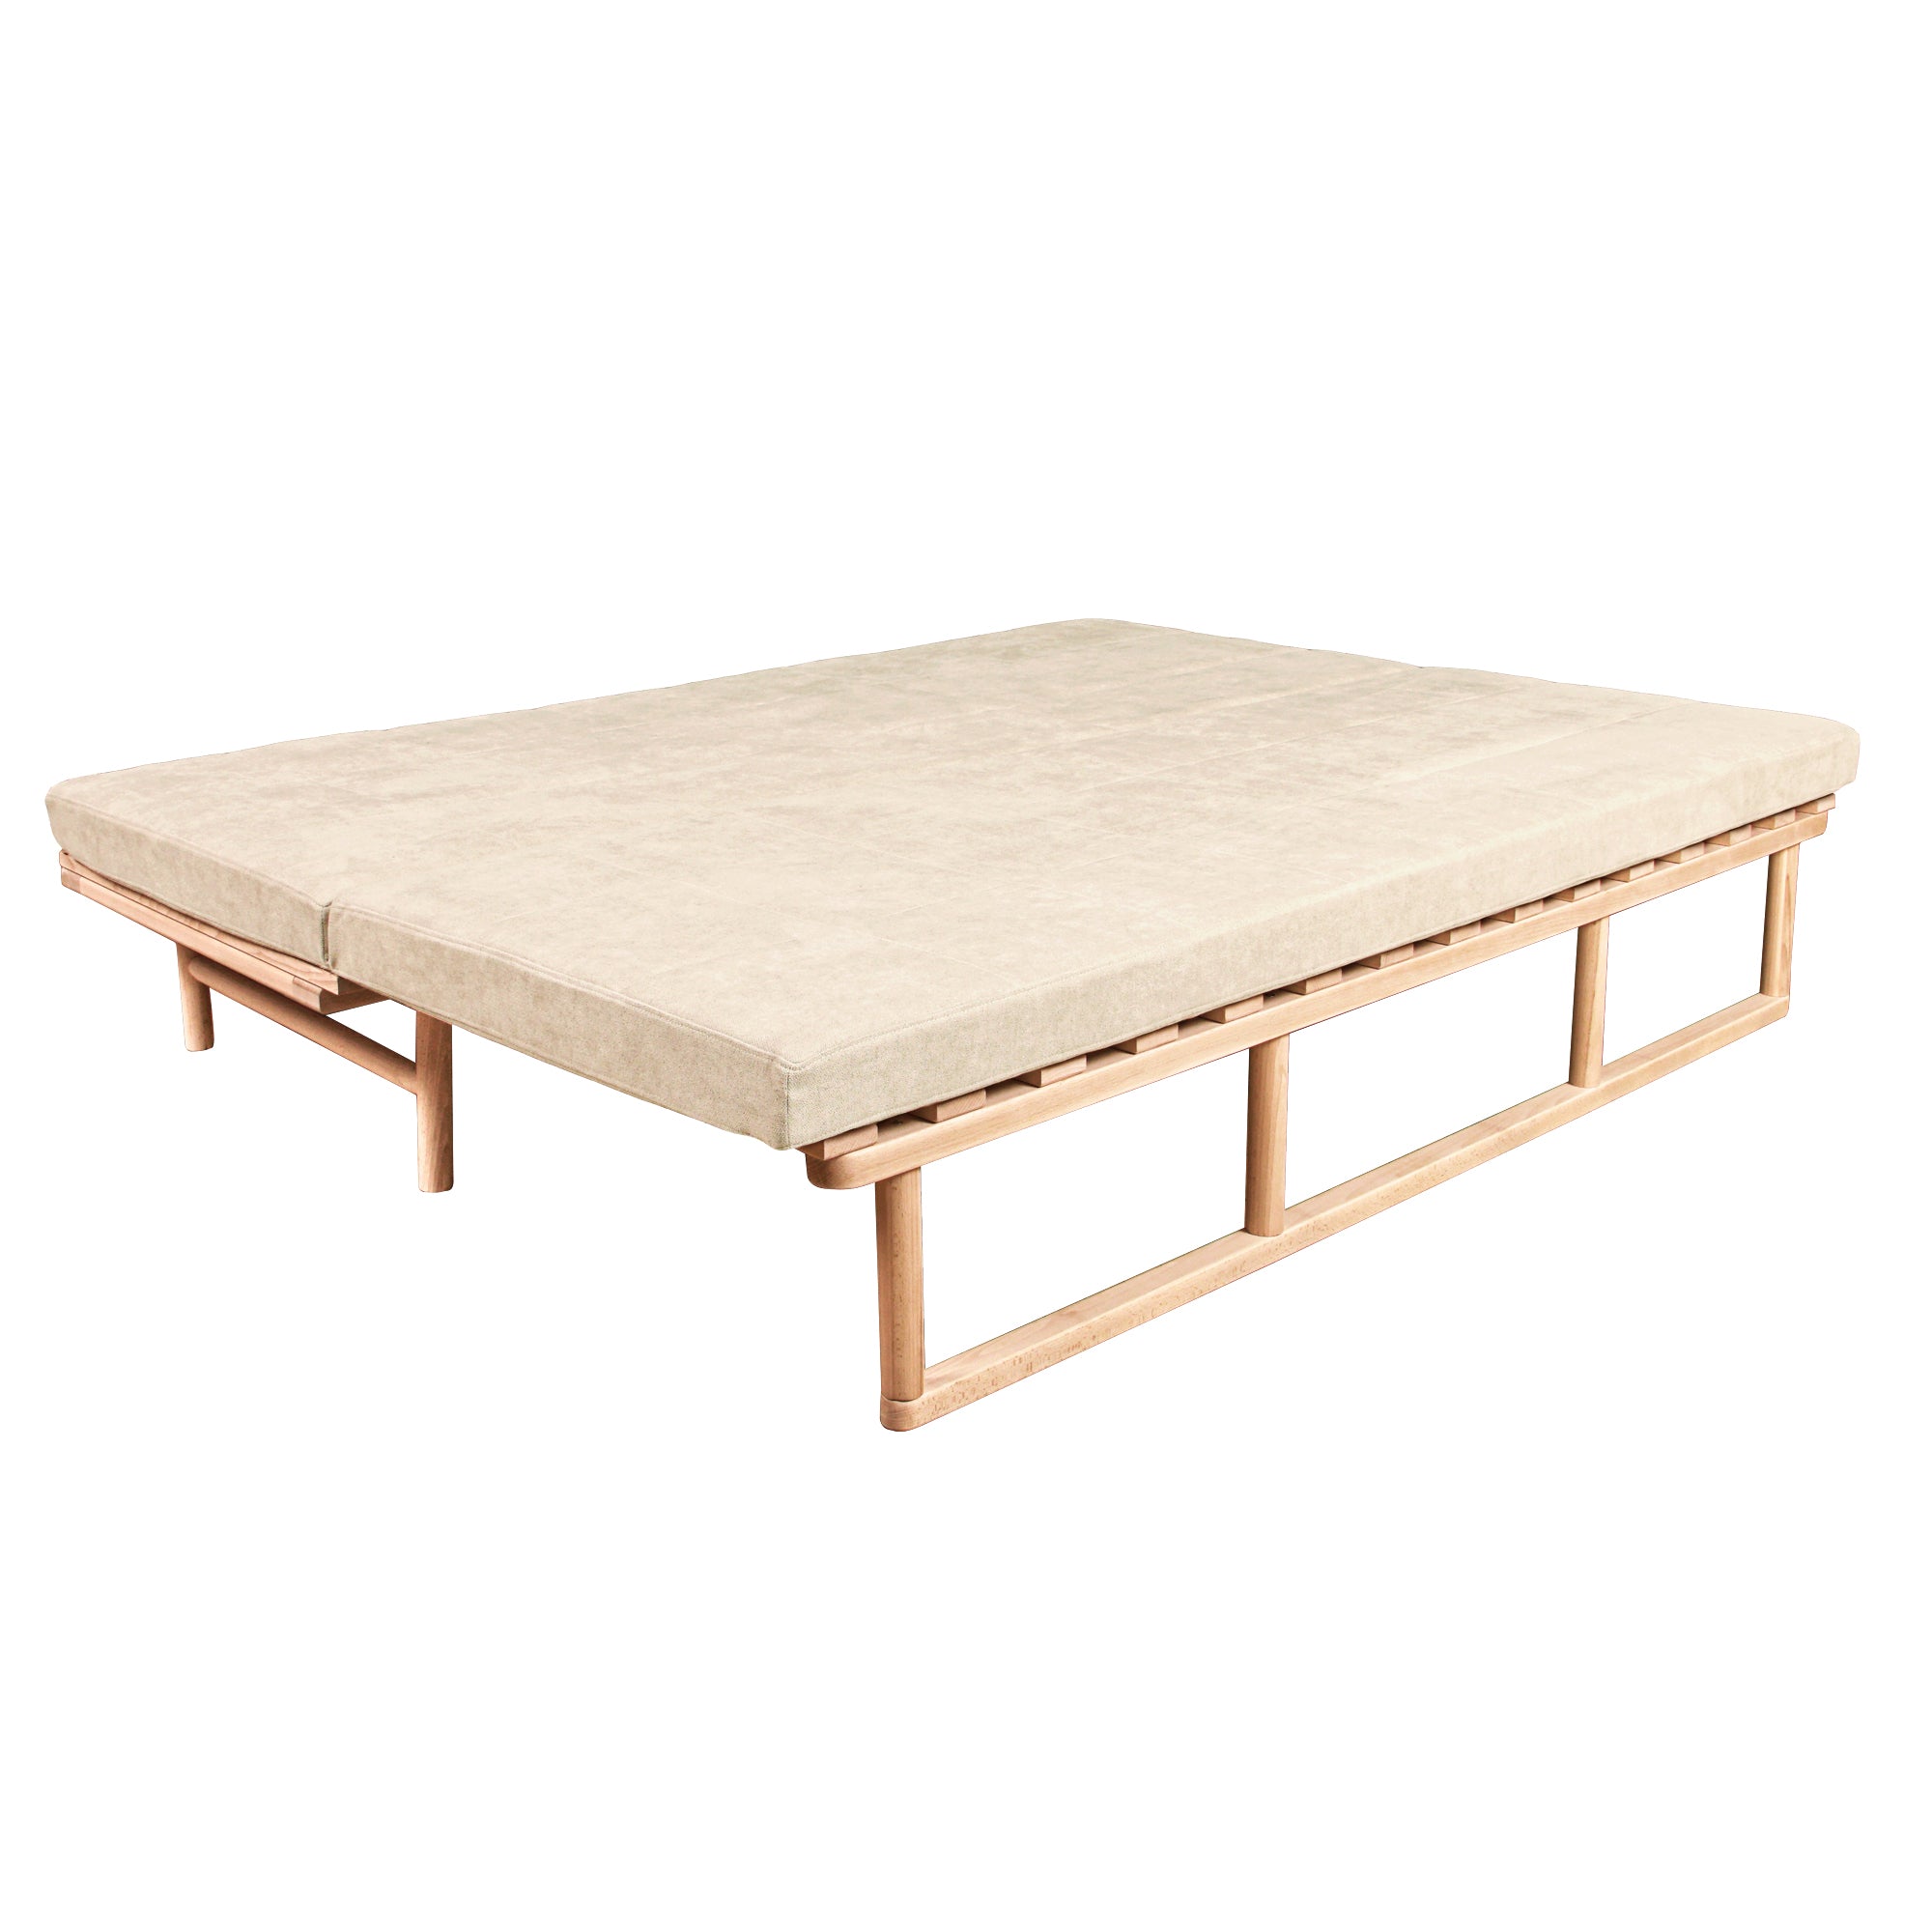 Le MAR Folding Daybed, Beech Wood Frame, Natural Colour-upholstery creamy-folded view